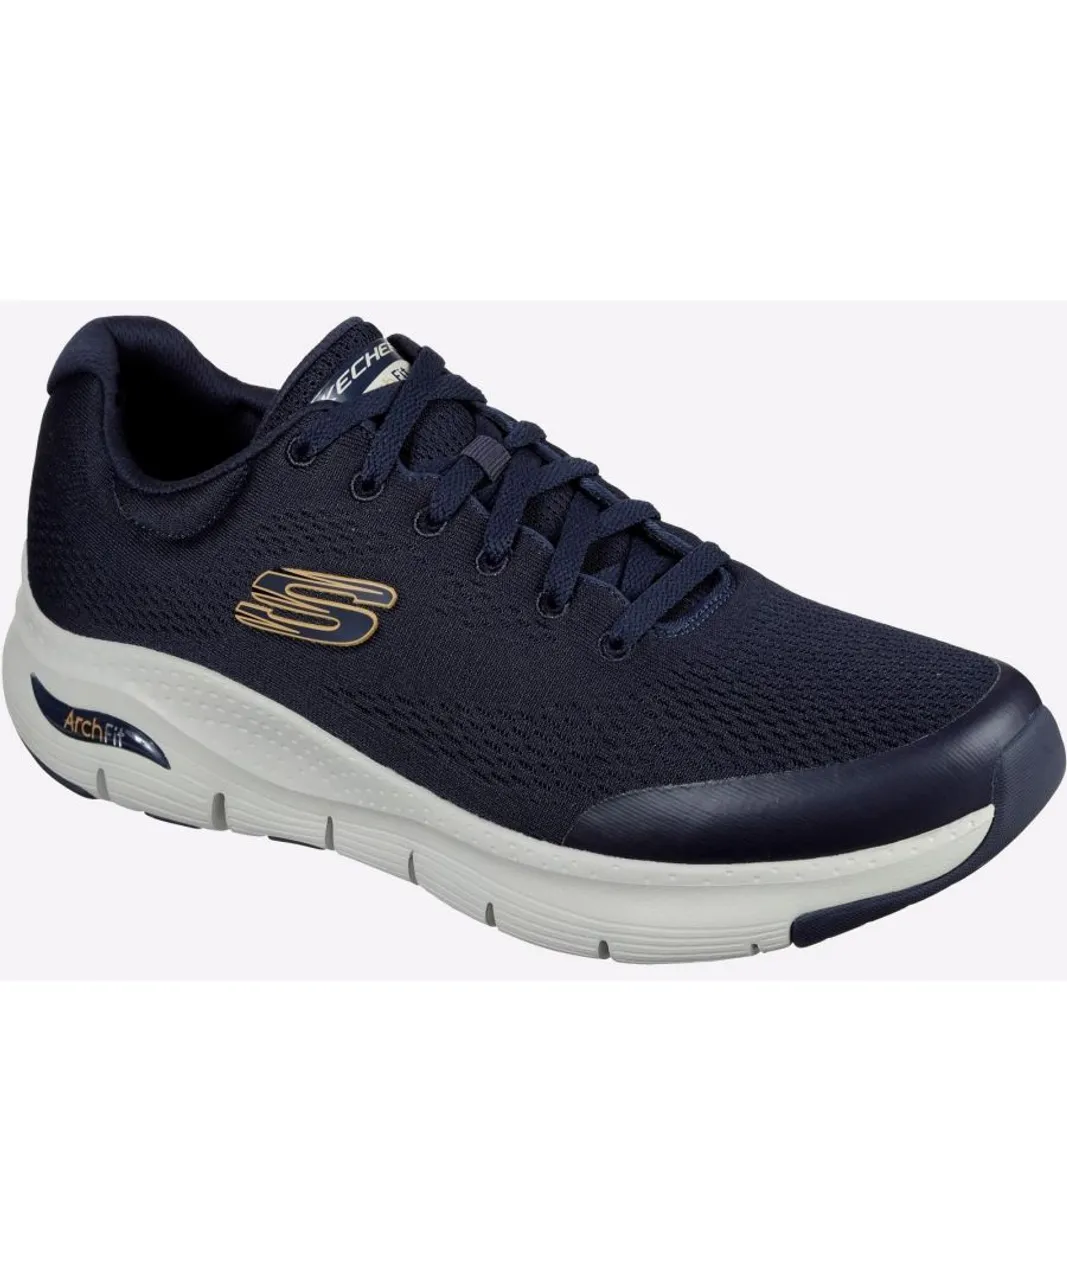 Skechers Arch Fit Sports Trainers Mens - Navy